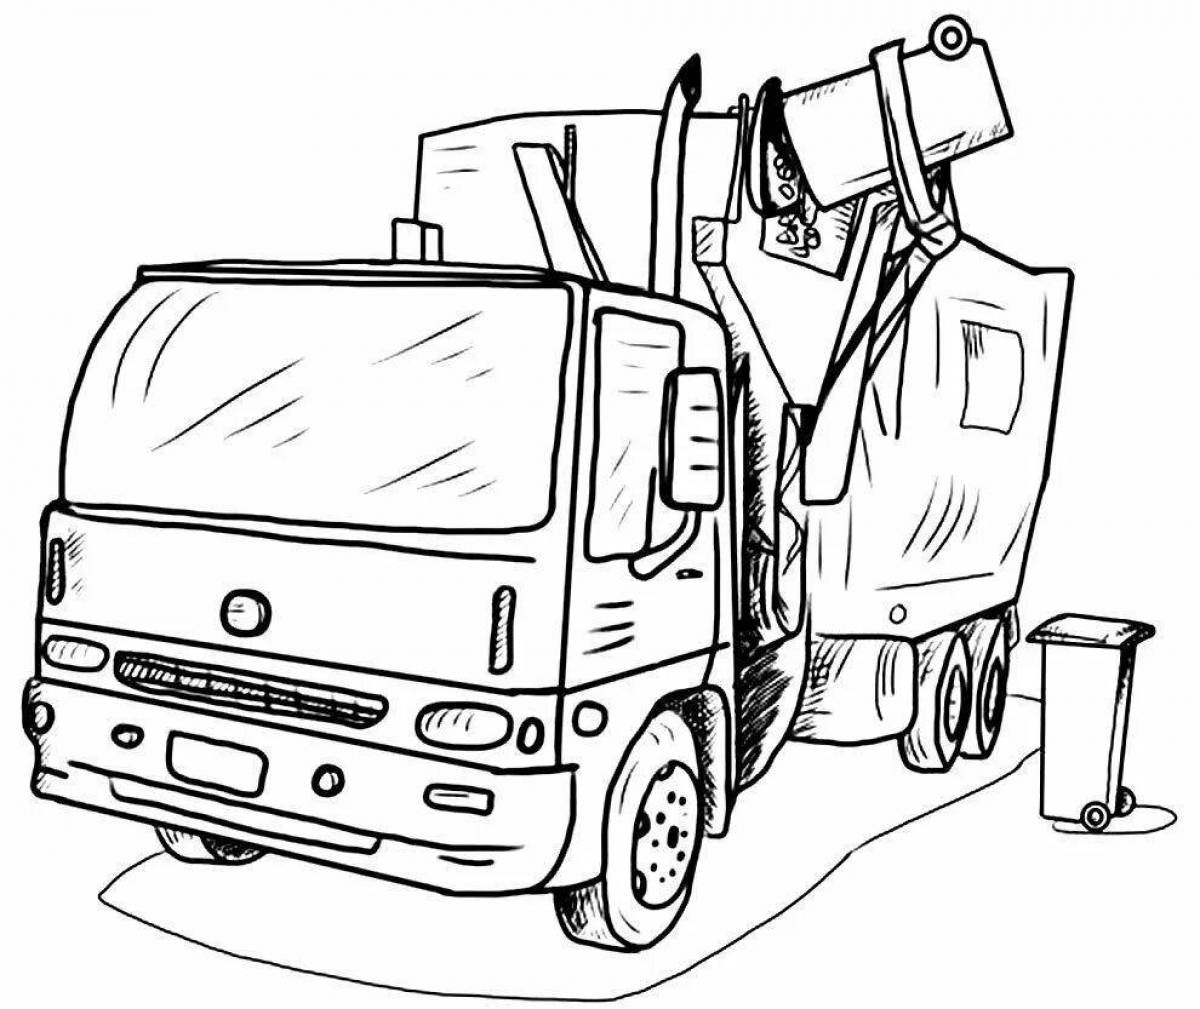 Wonderful garbage truck coloring book for 3-4 year olds